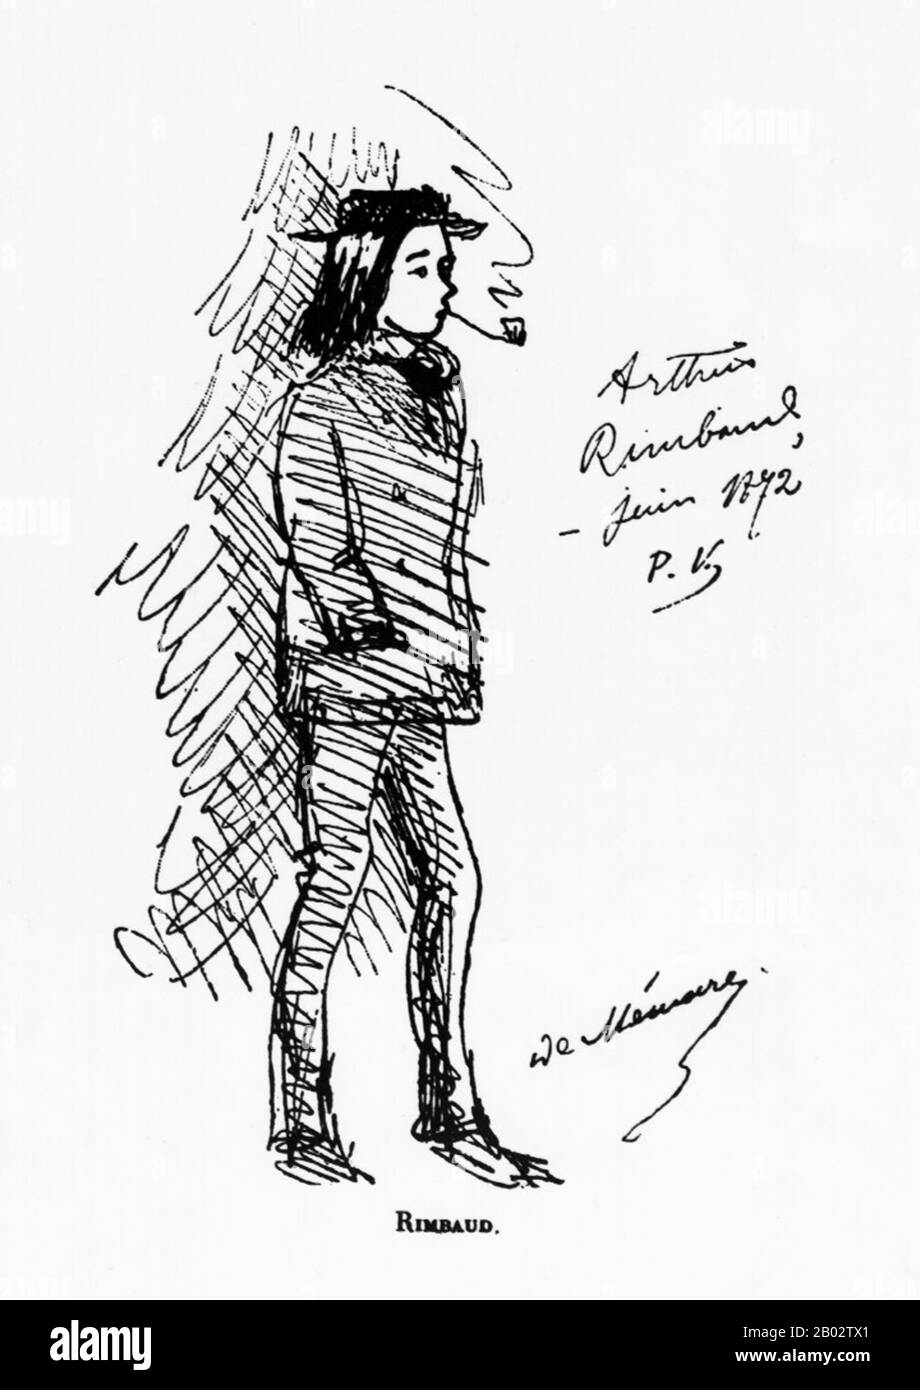 Jean Nicolas Arthur Rimbaud (20 October 1854 – 10 November 1891) was a French poet born in Charleville, Ardennes. He influenced modern literature and arts, inspired various musicians, and prefigured surrealism. He started writing poems at a very young age, while still in primary school, and stopped completely before he turned 21. He was mostly creative in his teens.  Rimbaud was known to have been a libertine and for being a restless soul. He traveled extensively on three continents before his death from cancer just after his thirty-seventh birthday. Stock Photo